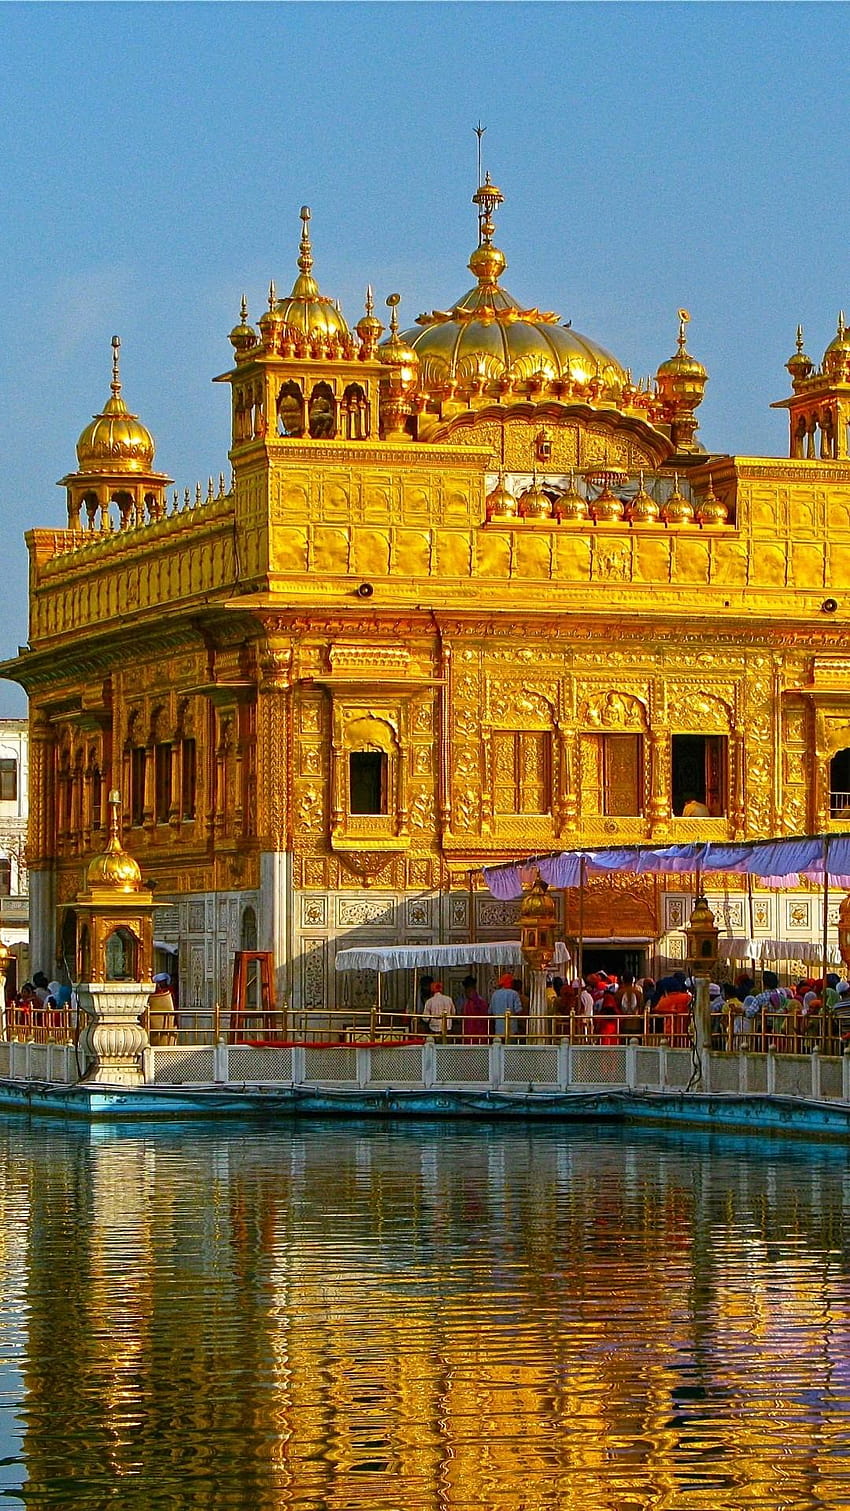 Golden Temple, gurdwaras without Diwali lighting this year | India.com